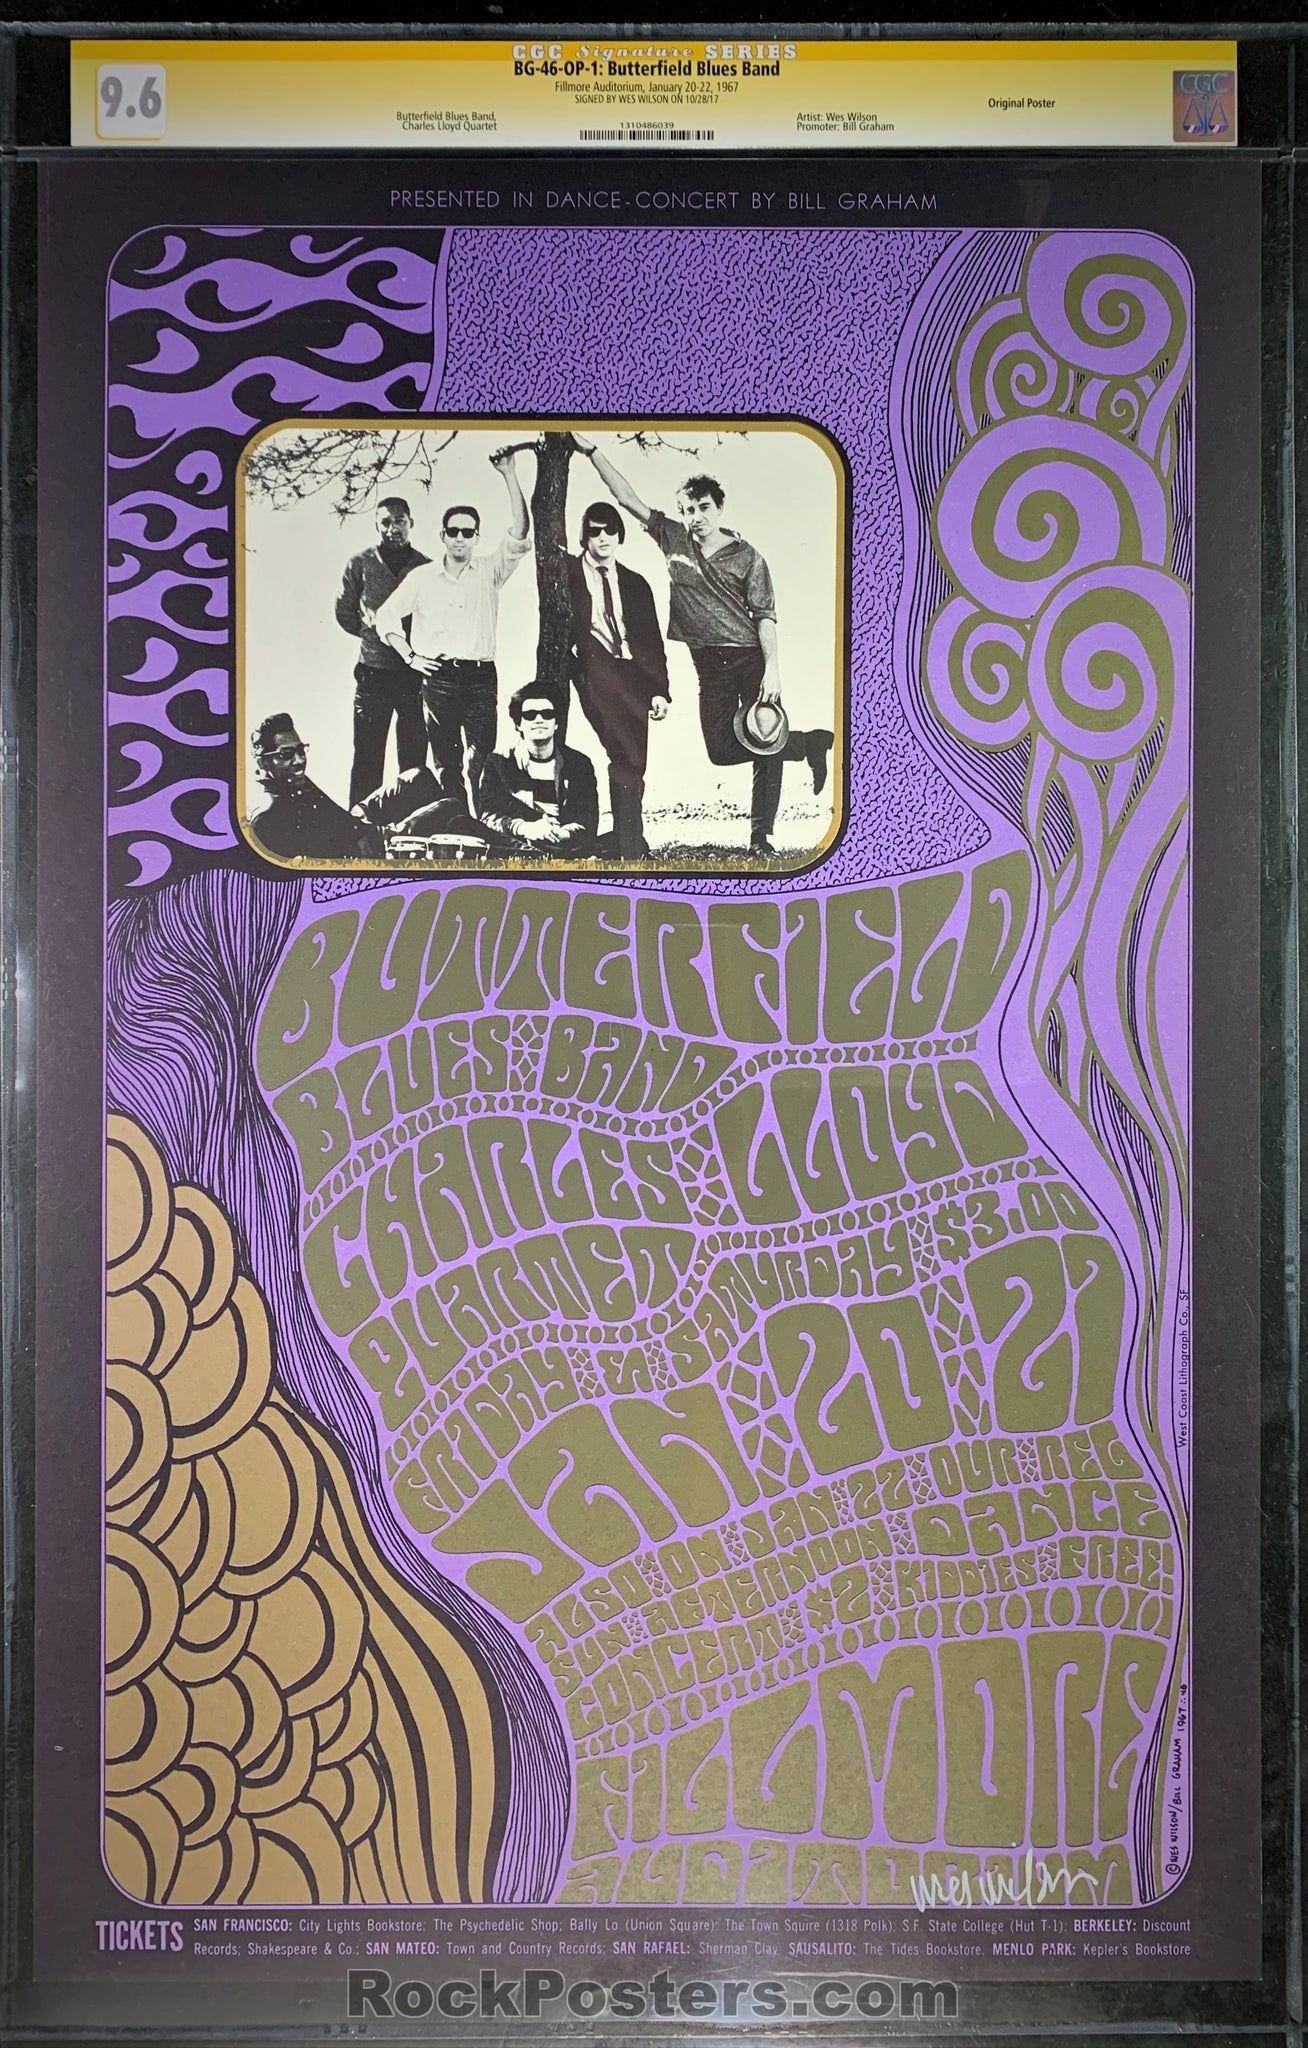 AUCTION - BG-46 - Butterfield Blues Band - Wes Wilson Signed - 1967 Poster - Fillmore Auditorium -  CGC Graded 9.6